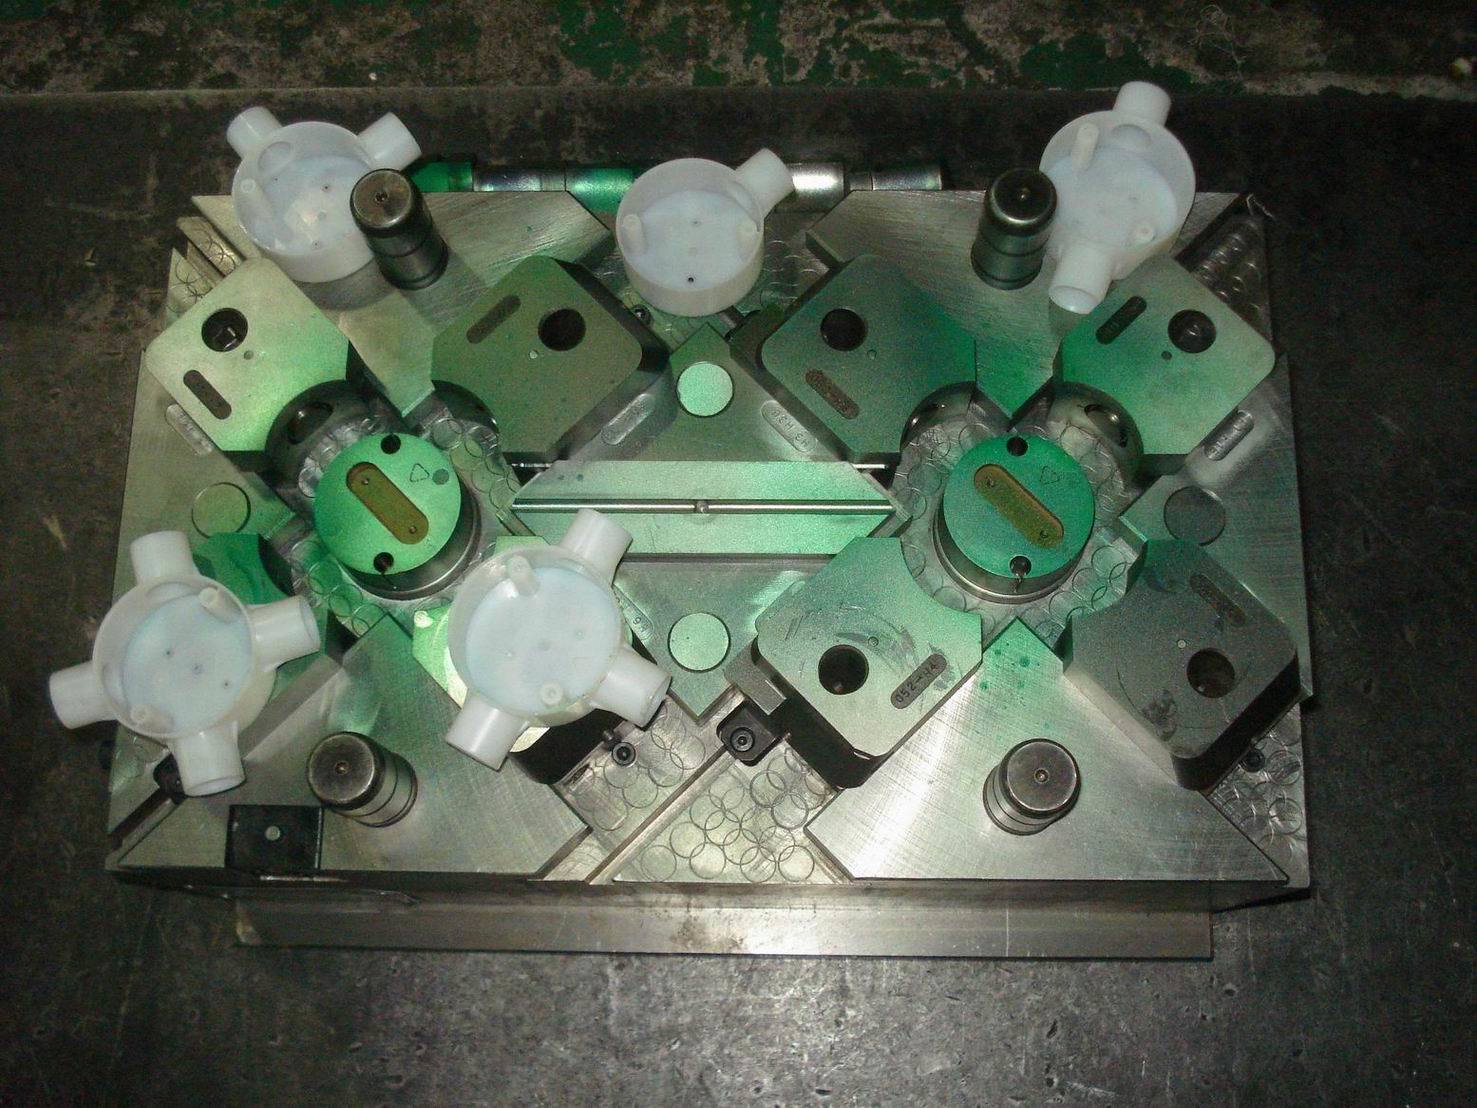 4 Way Box PVC Injection Mould, 2 Cavity Plastic Mould, Automatic Mould, Pipe Fitting Mould